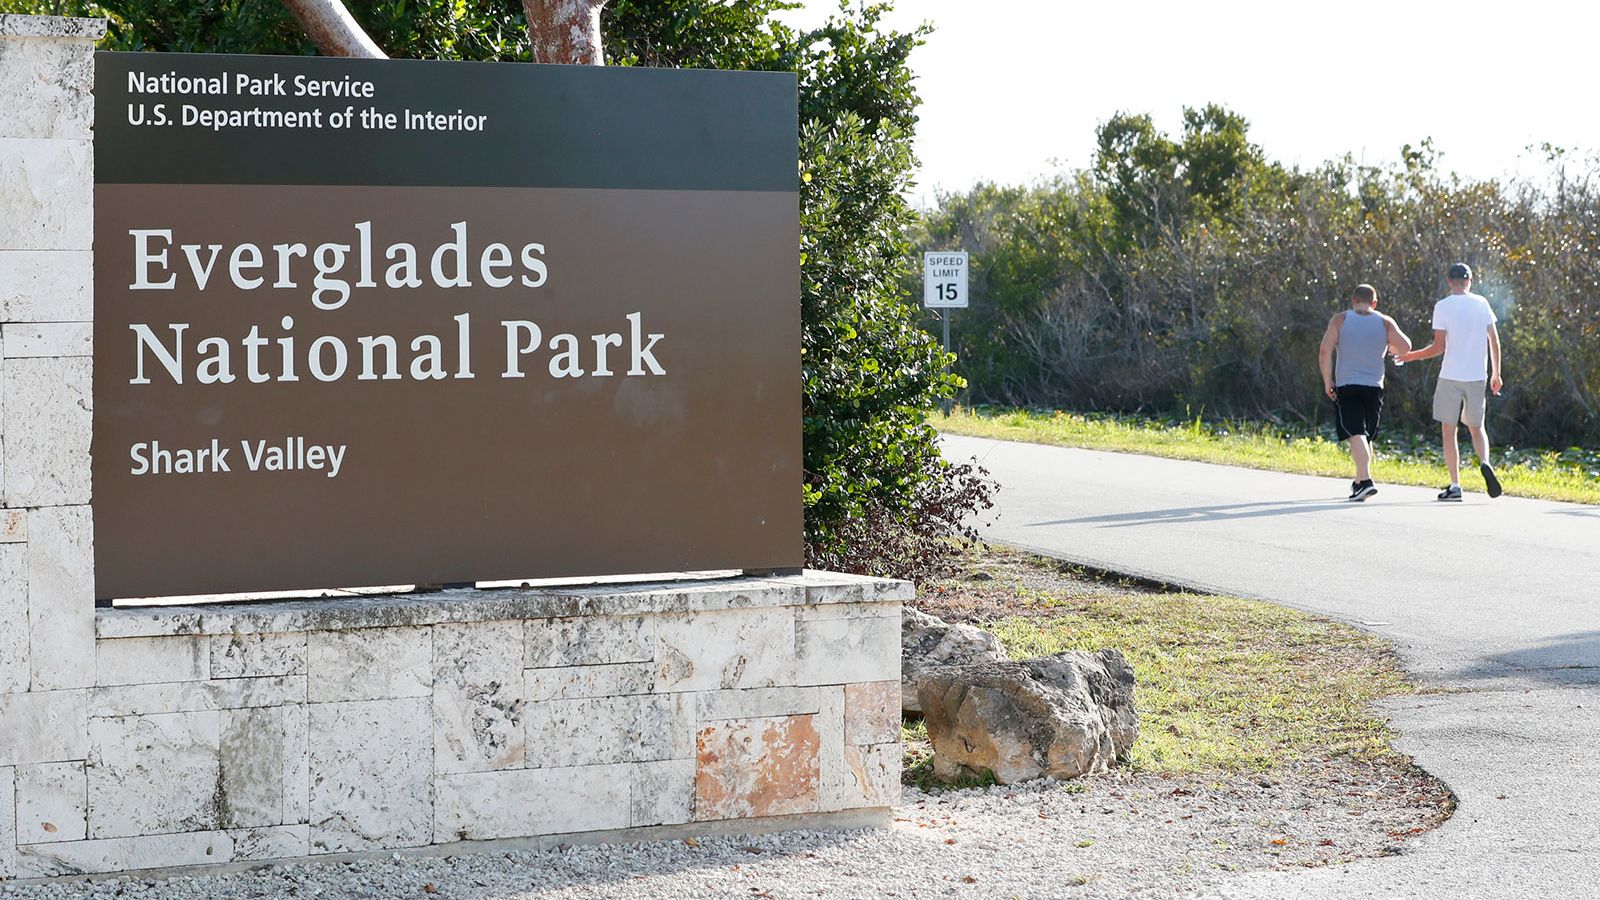 Visitors walk past a sign for Everglades National Park in Florida in this 2019 file photo.